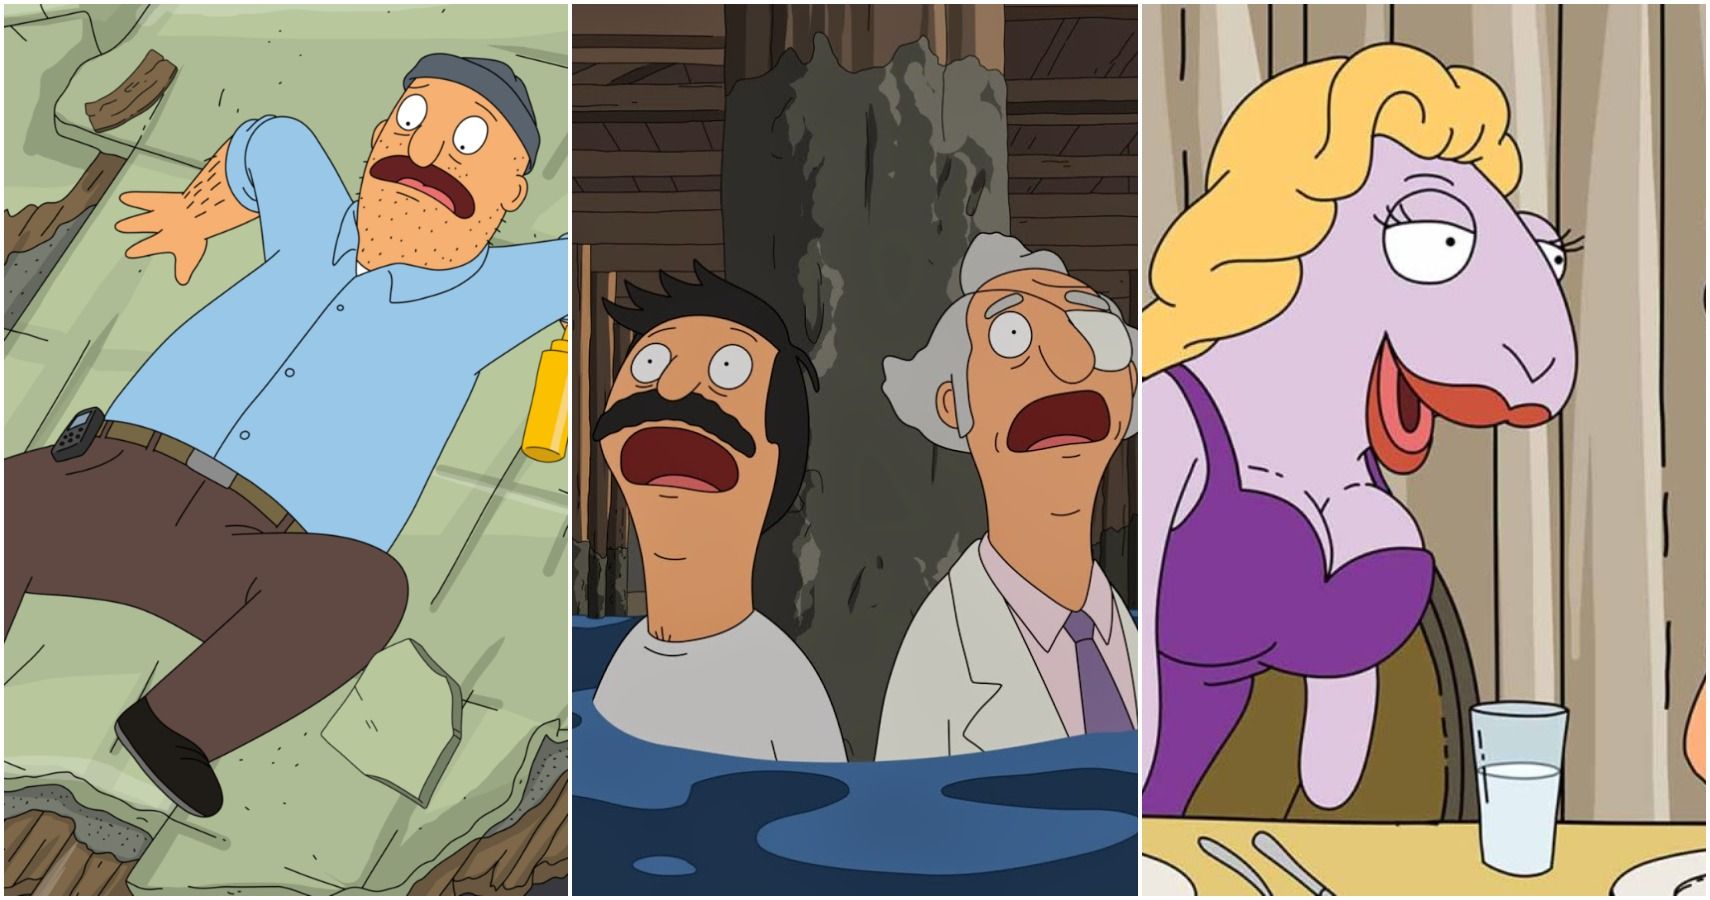 Bobs Burgers 10 Scariest NonHalloween Episodes Ranked